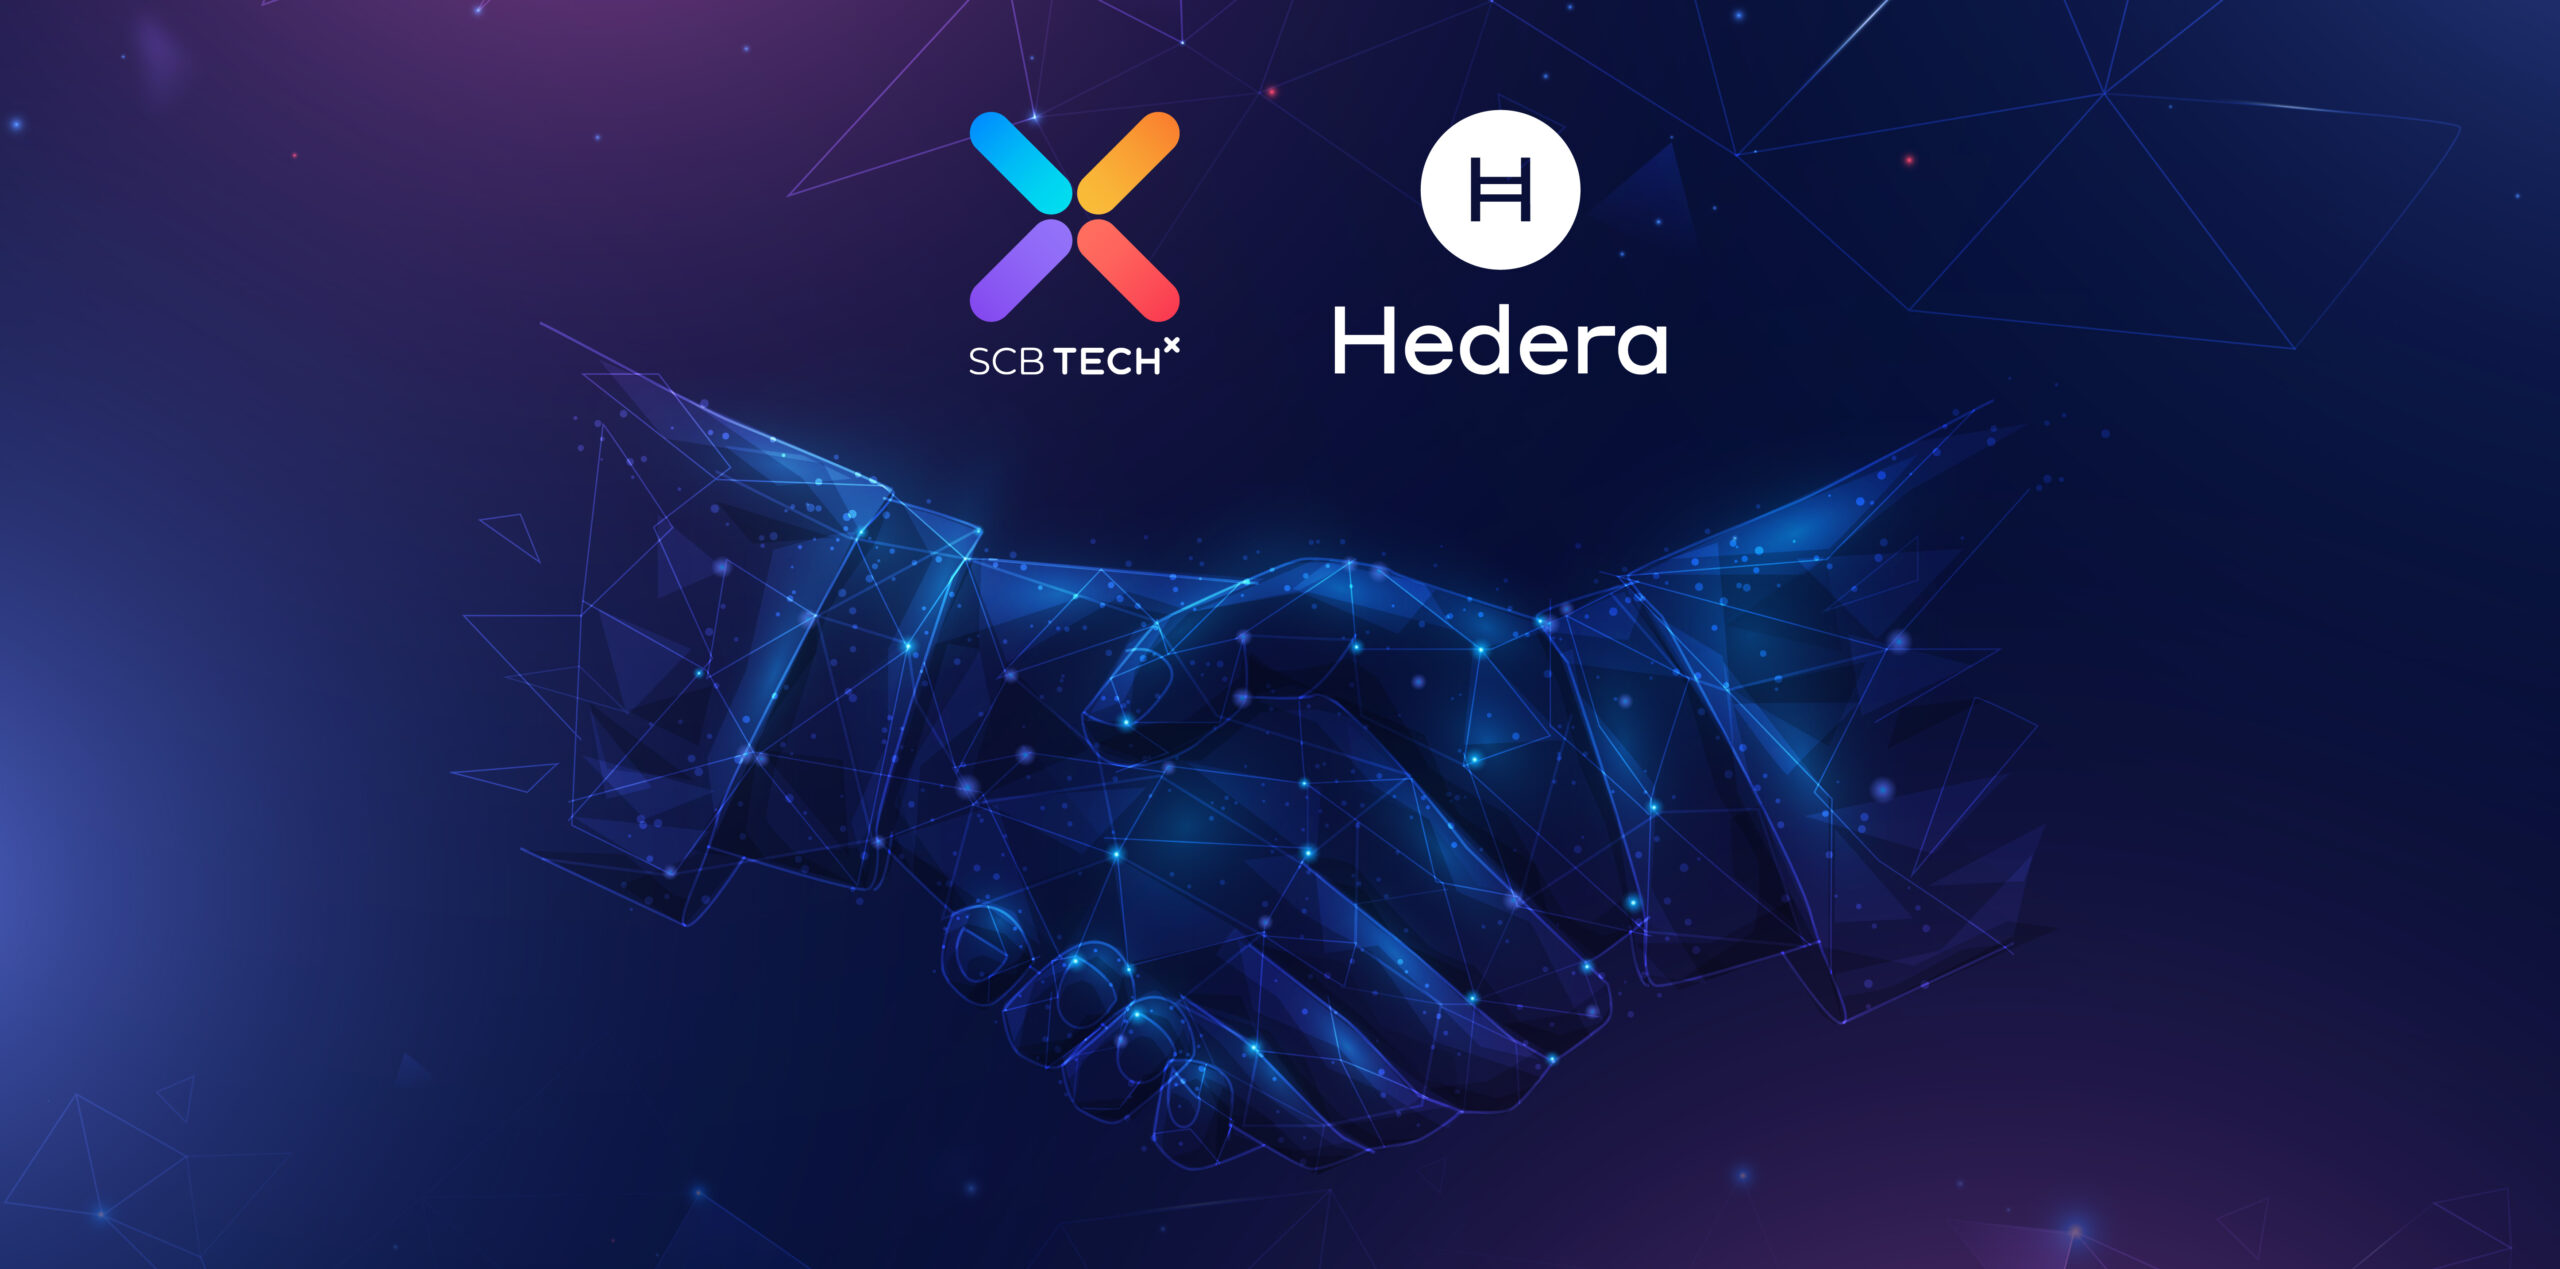 SCB TechX to explore stablecoin use case for cross-border remittance using Distributed Ledger Technology (DLT) on Hedera Network